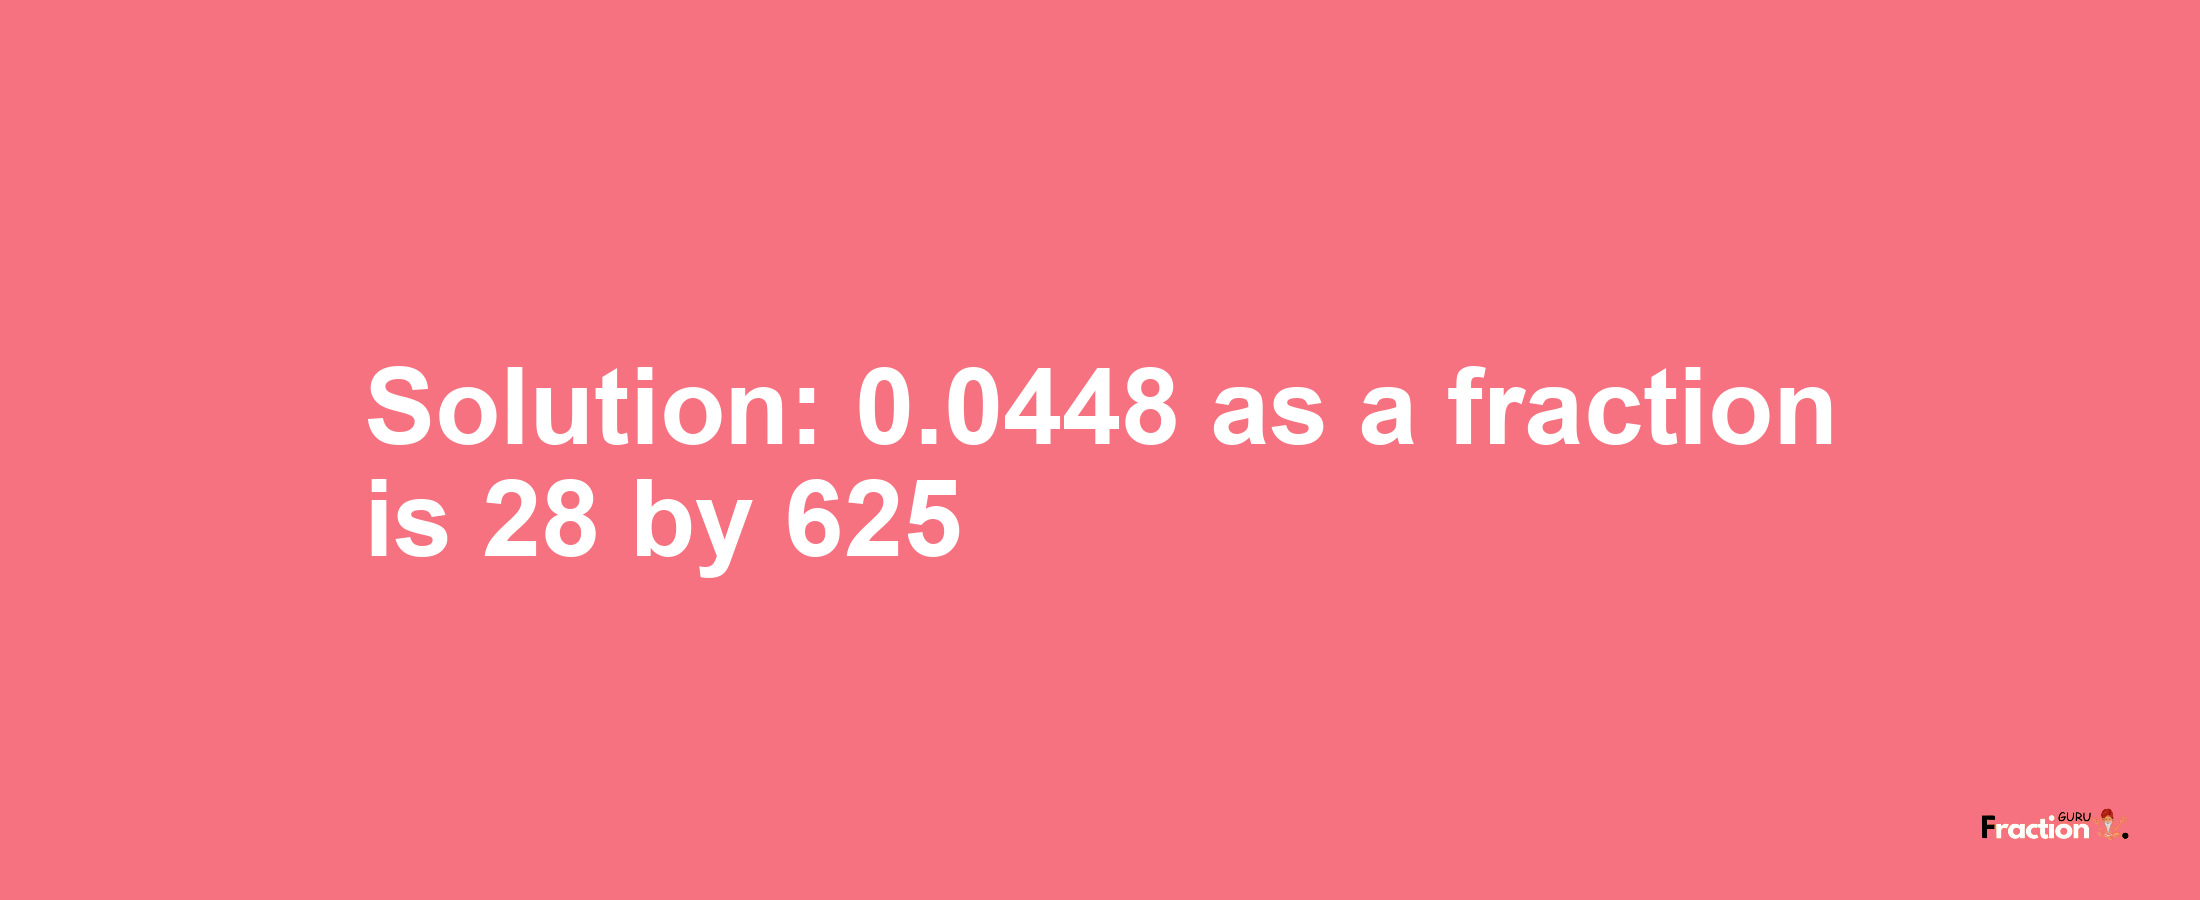 Solution:0.0448 as a fraction is 28/625